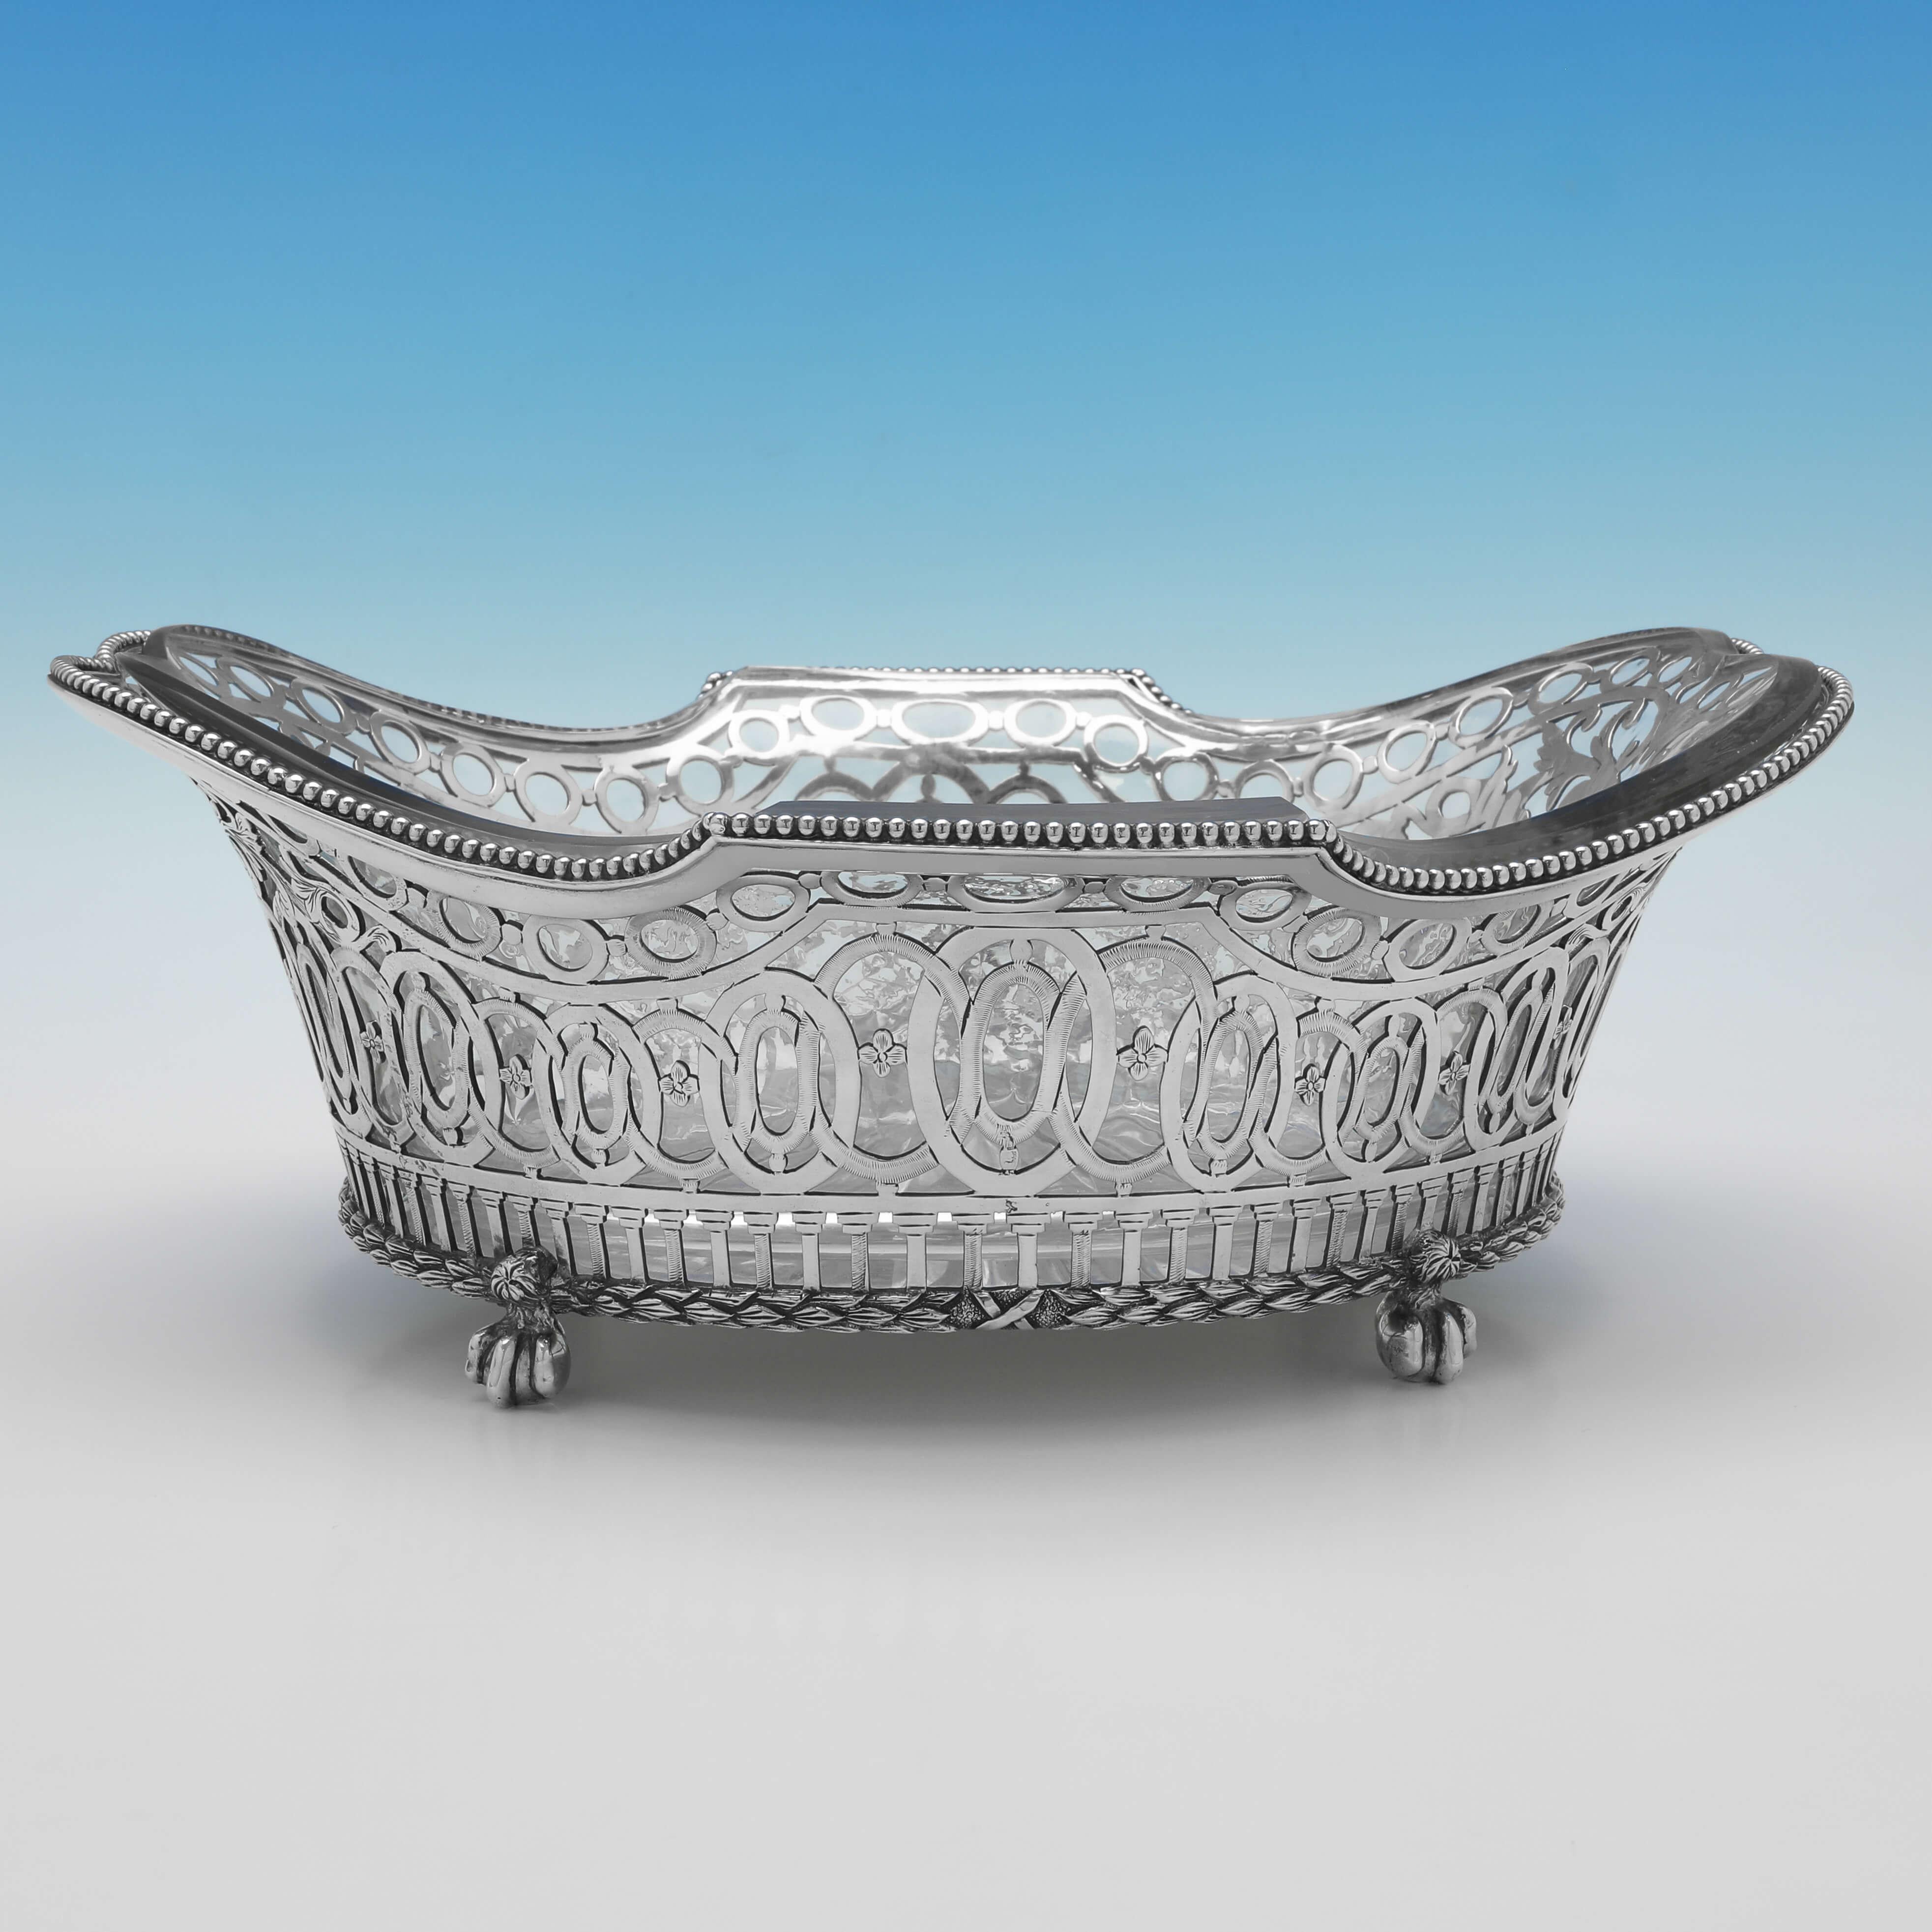 Hallmarked in London in 1890 by Dobson & Sons, this attractive, Victorian, antique sterling silver dish, stands on 4 ball and claw feet, and features bead detailing, pierced and engraved decoration and a glass liner. 

The dish measures 4.5